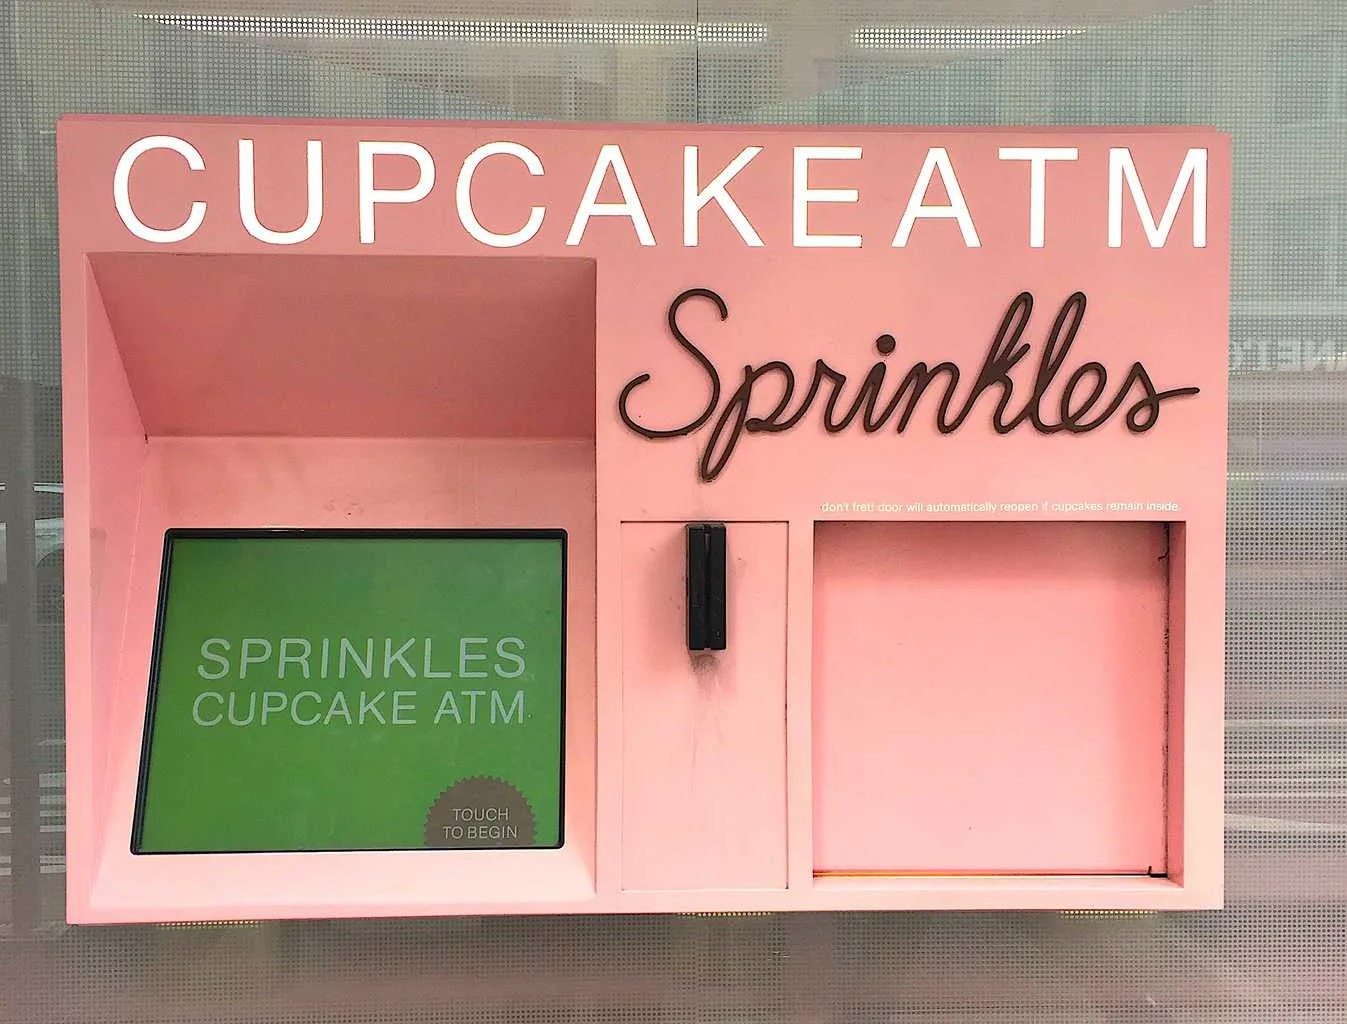 One of the most unusual things to do in NYC is to stop by the Sprinkles Cupcake ATM and pick up a delicious, lemon and coconut cupcake.